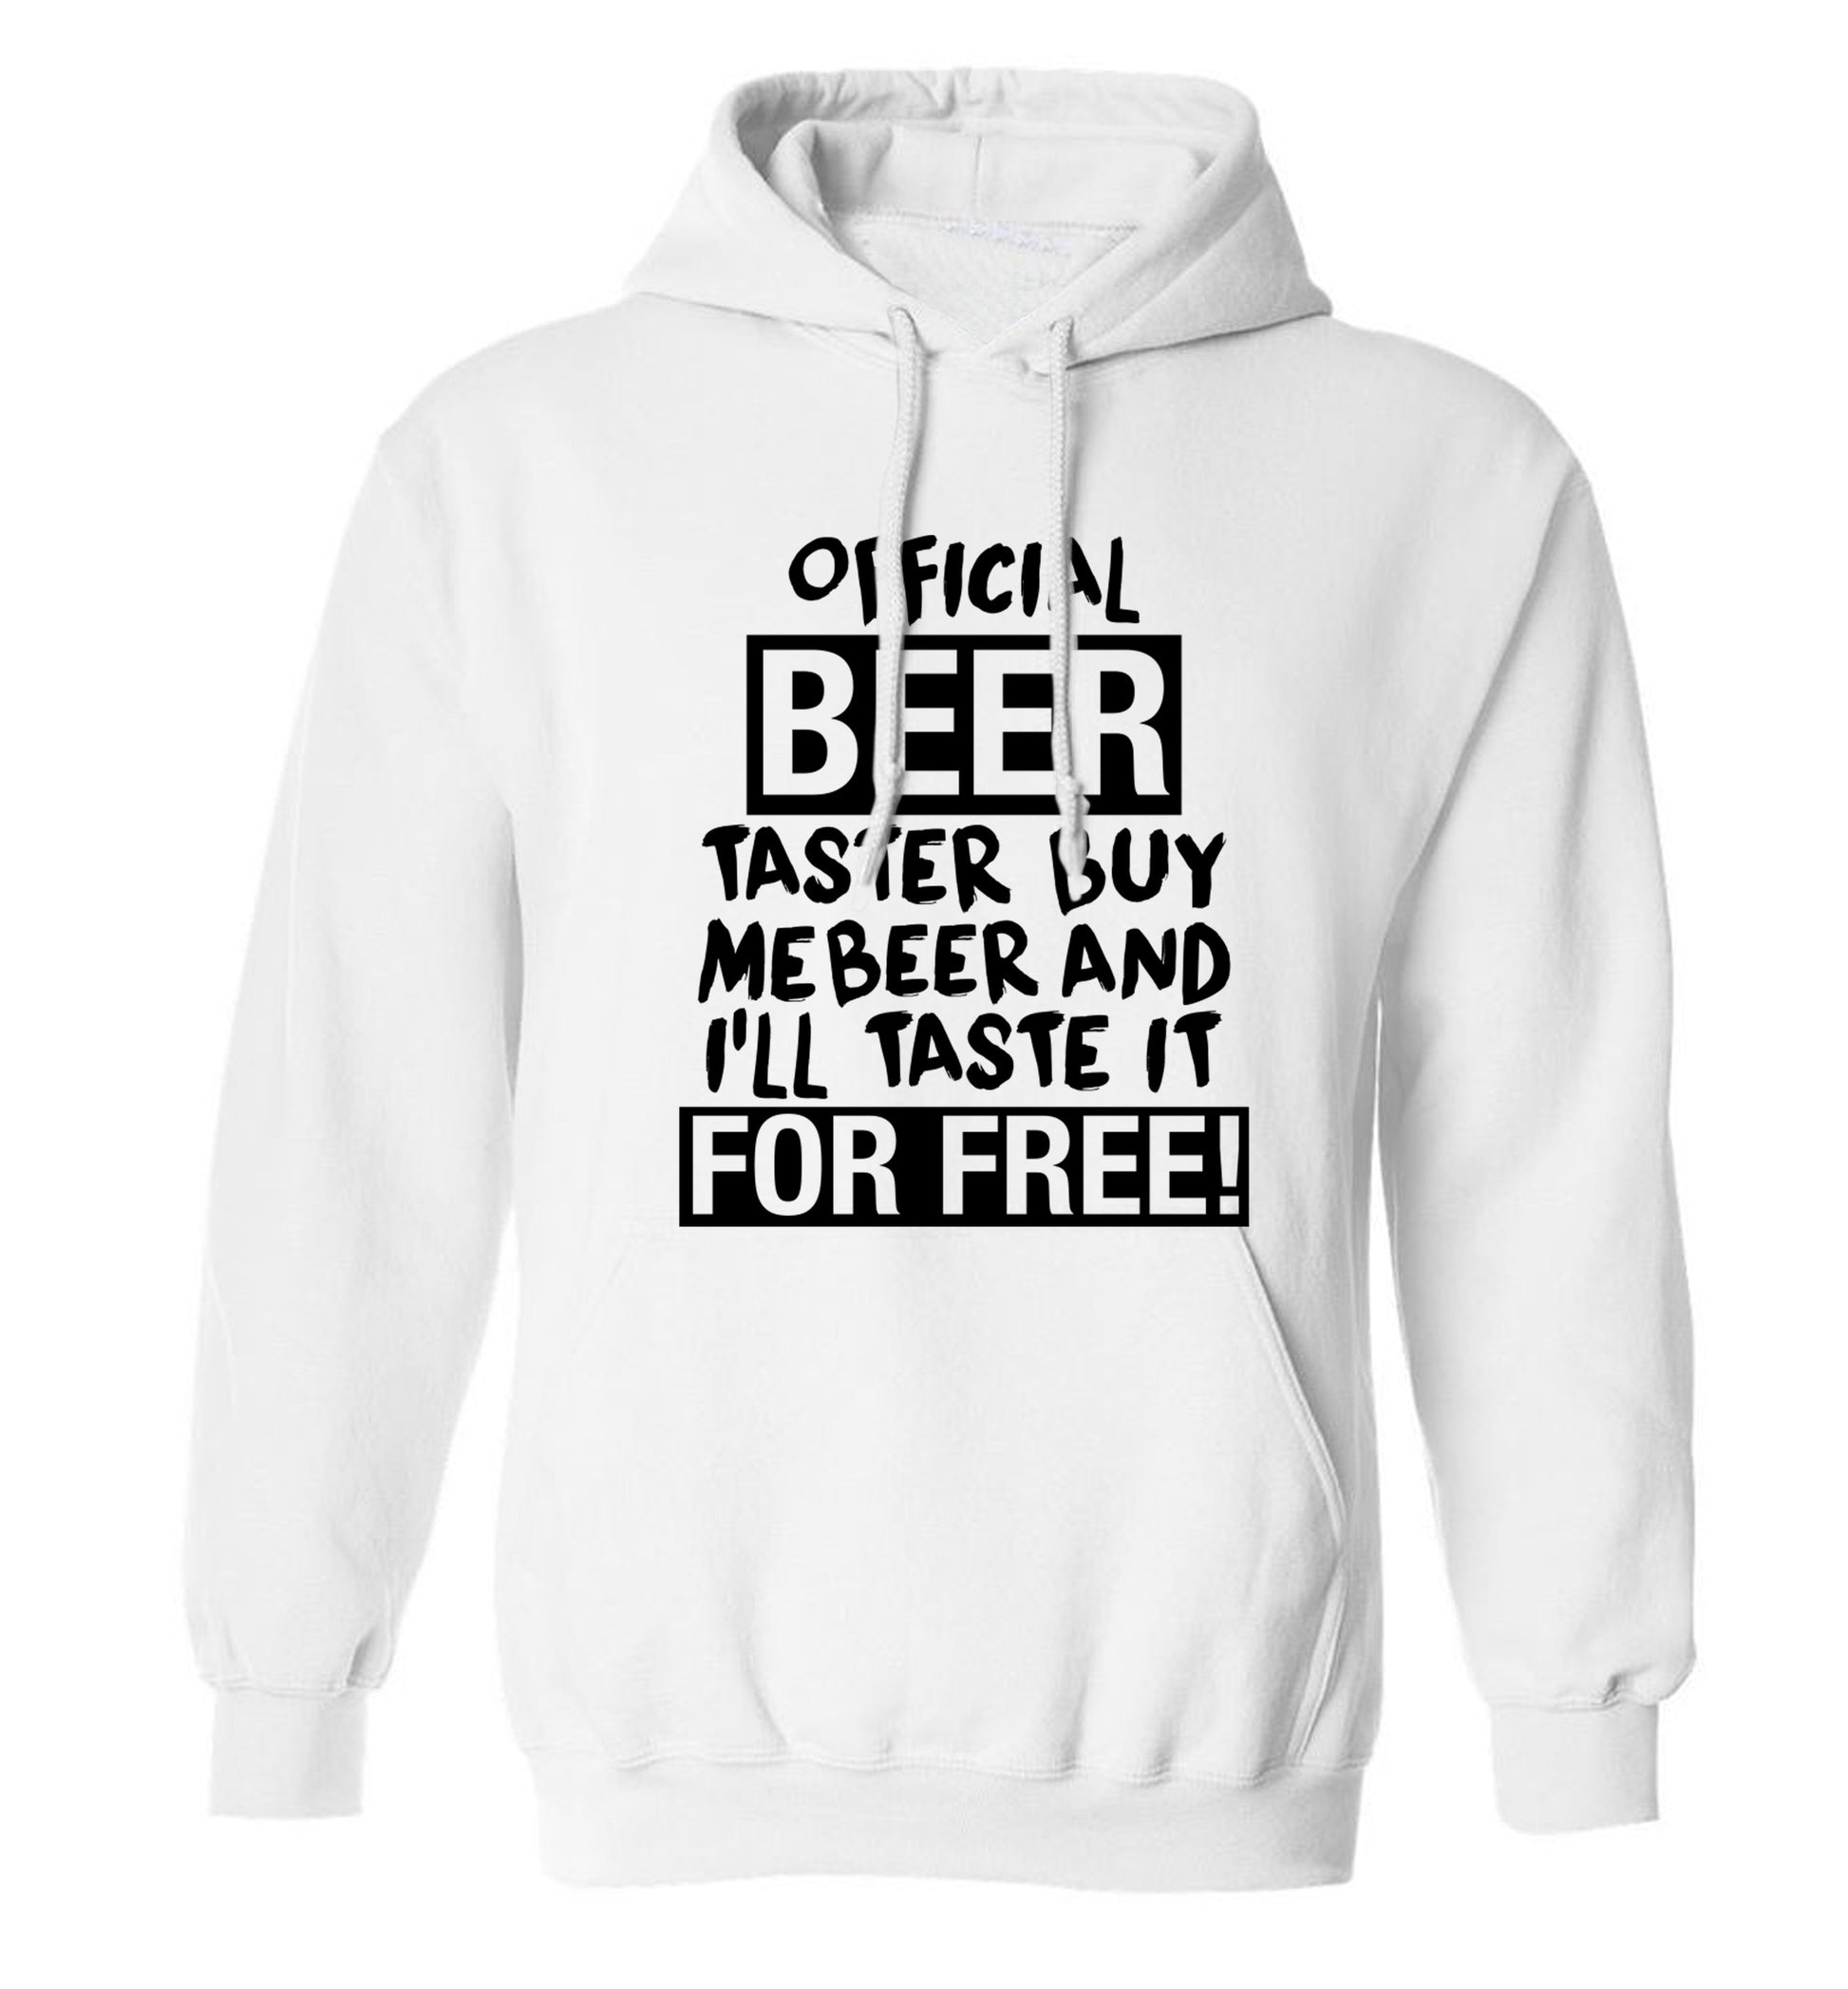 Official beer taster buy me beer and I'll taste it for free! adults unisex white hoodie 2XL